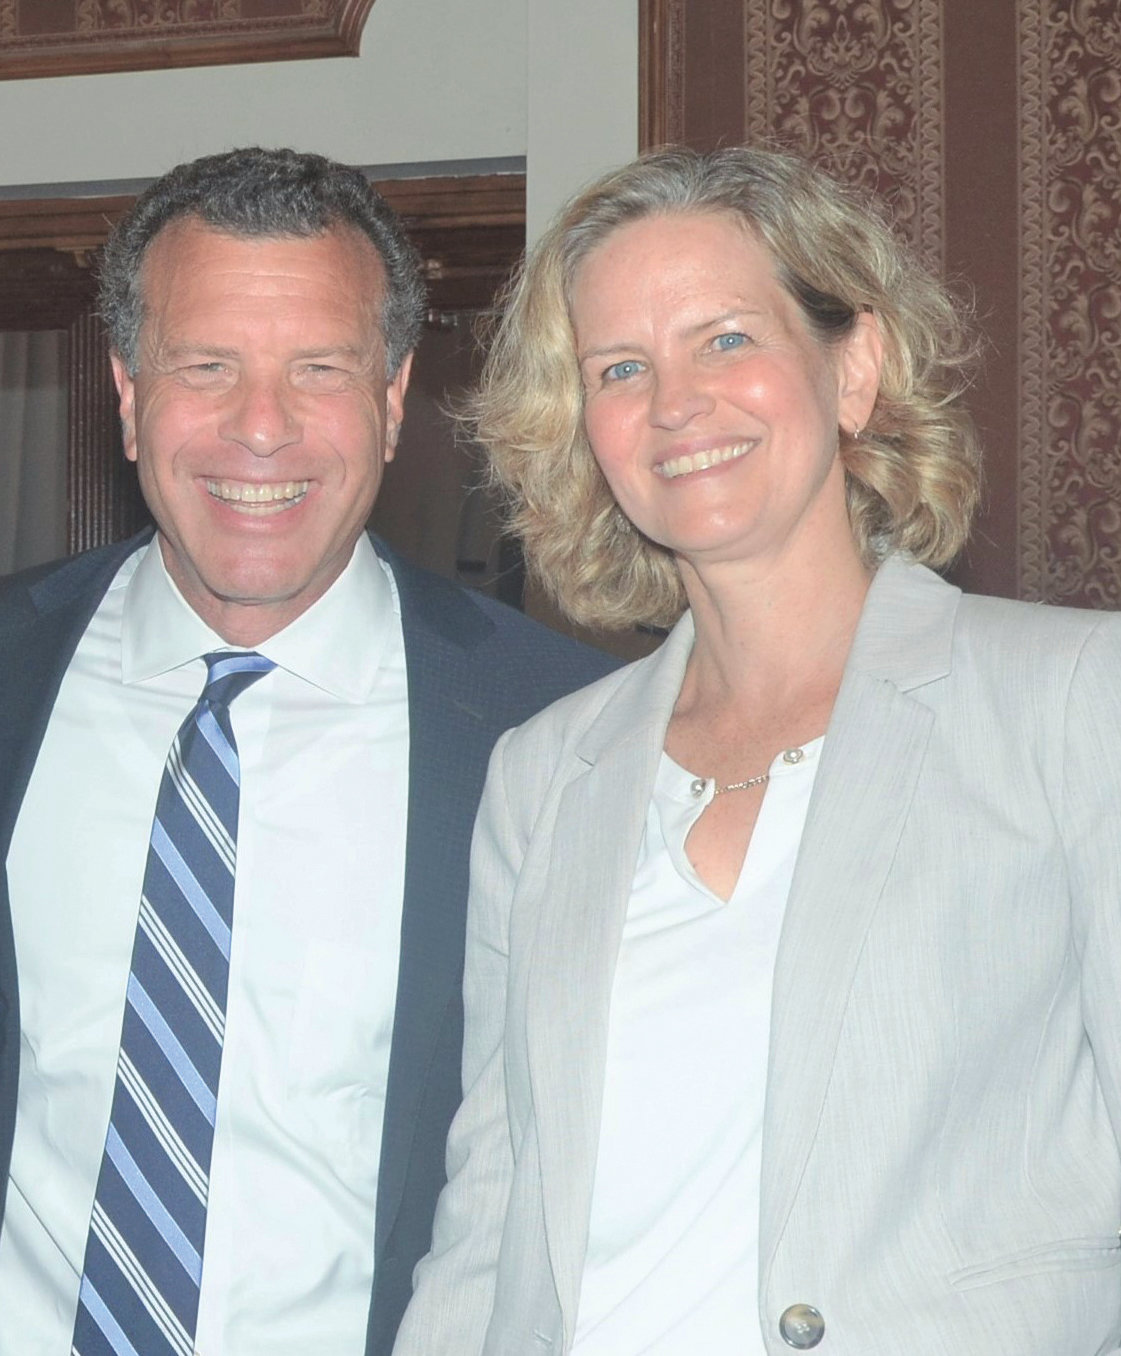 Stuart Richner, the president and publisher of Richner Communications, left, was with Nassau County Executive Laura Curran, at the Aug. 8 event.